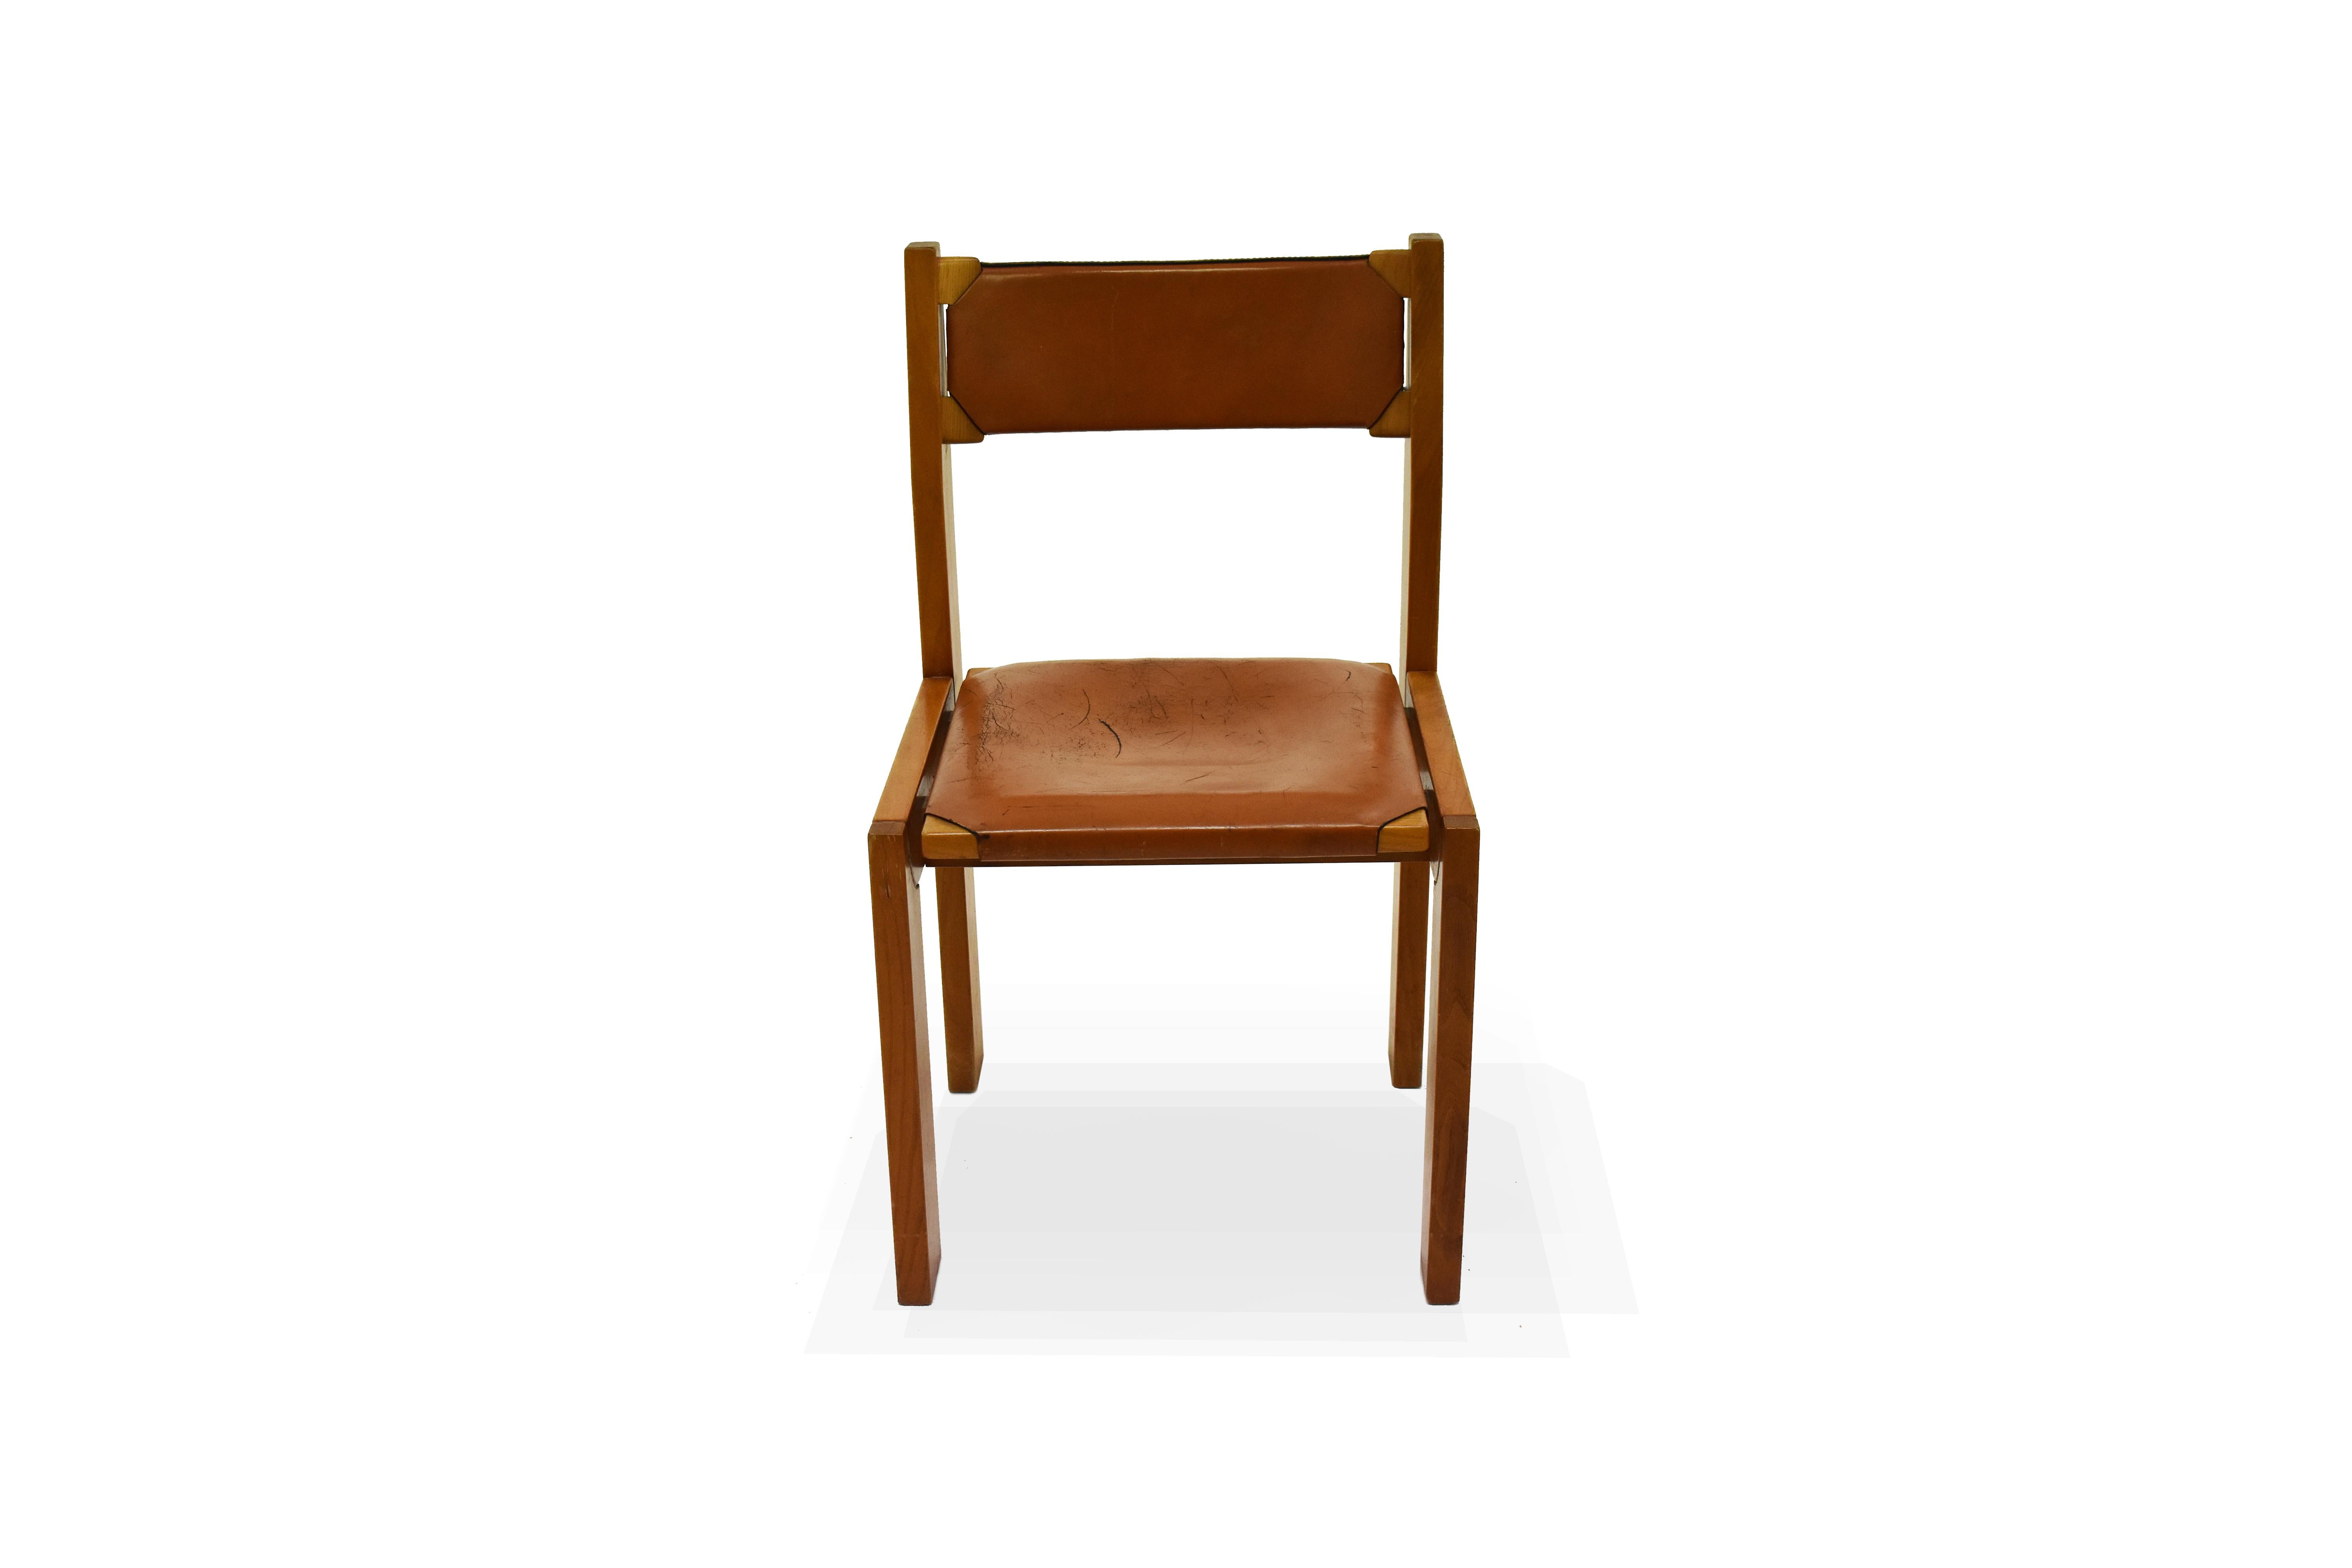 These chairs are made in Orme, a blond wood. The brown Leather is very thick.
This model is very similar, to the model S24 by Pierre Chapo.
Made in France 1970.